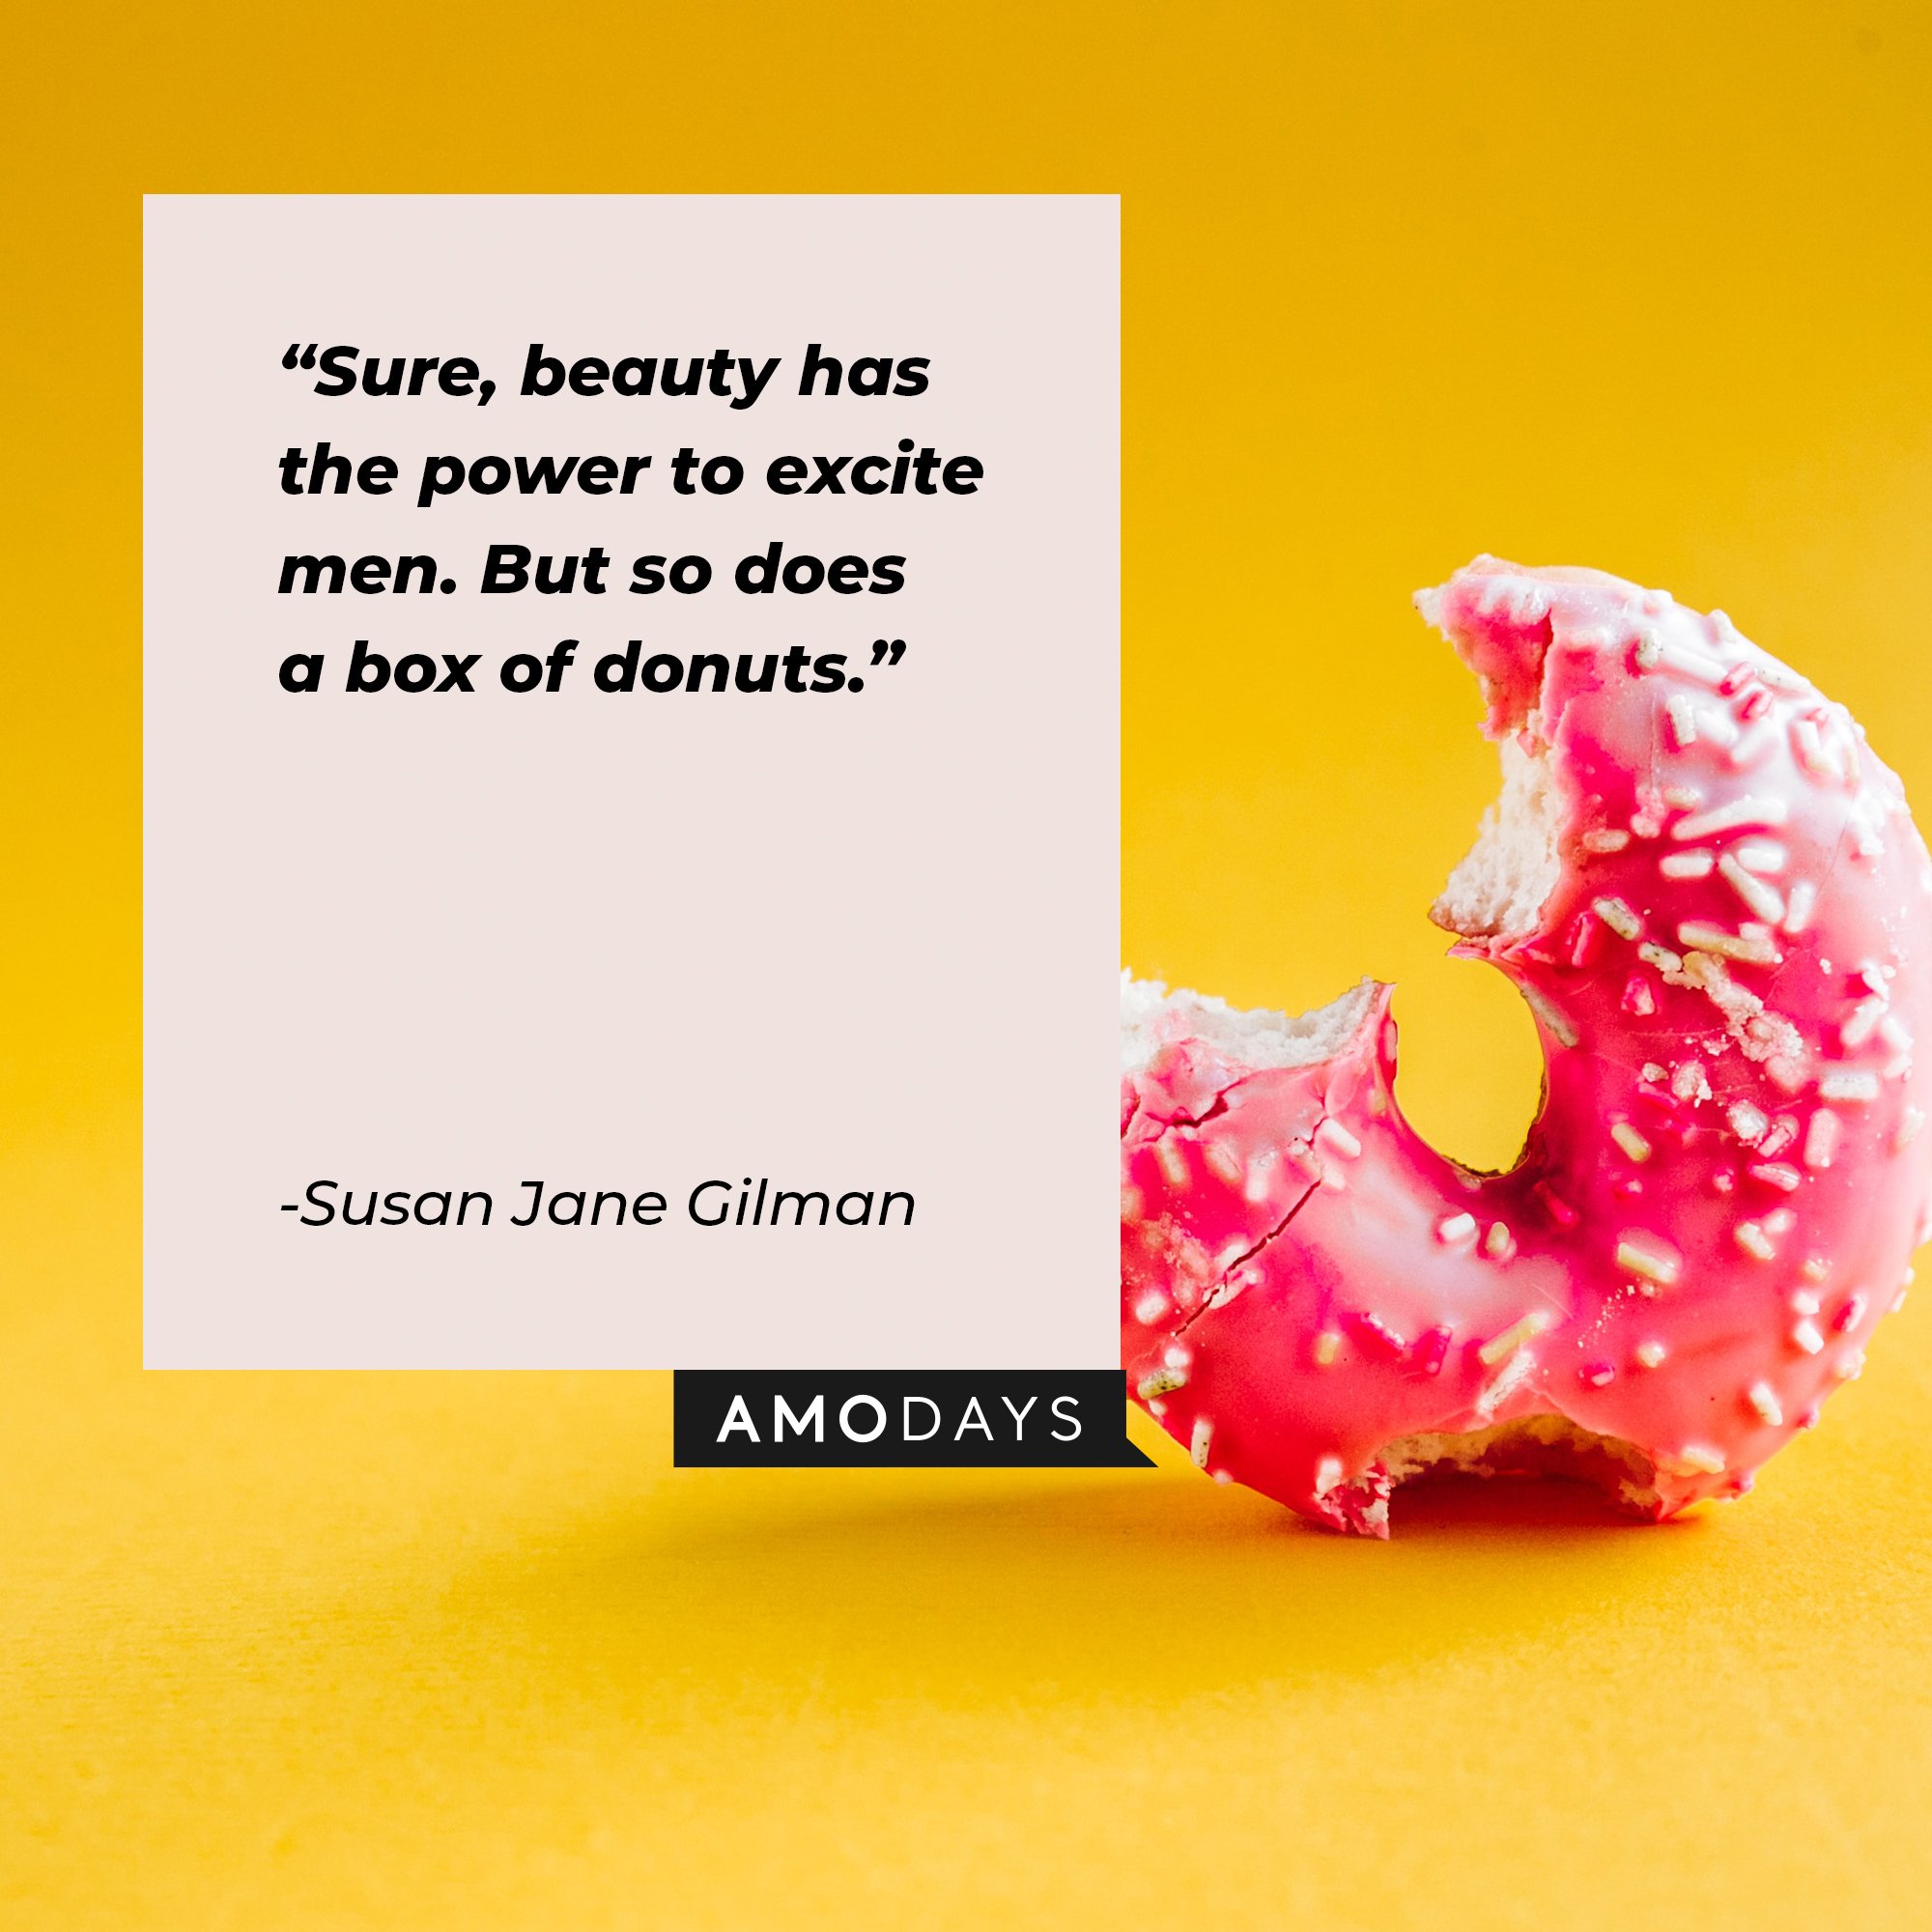 Susan Jane Gilman's quote: "Sure, beauty has the power to excite men. But so does a box of donuts." | Image: AmoDays